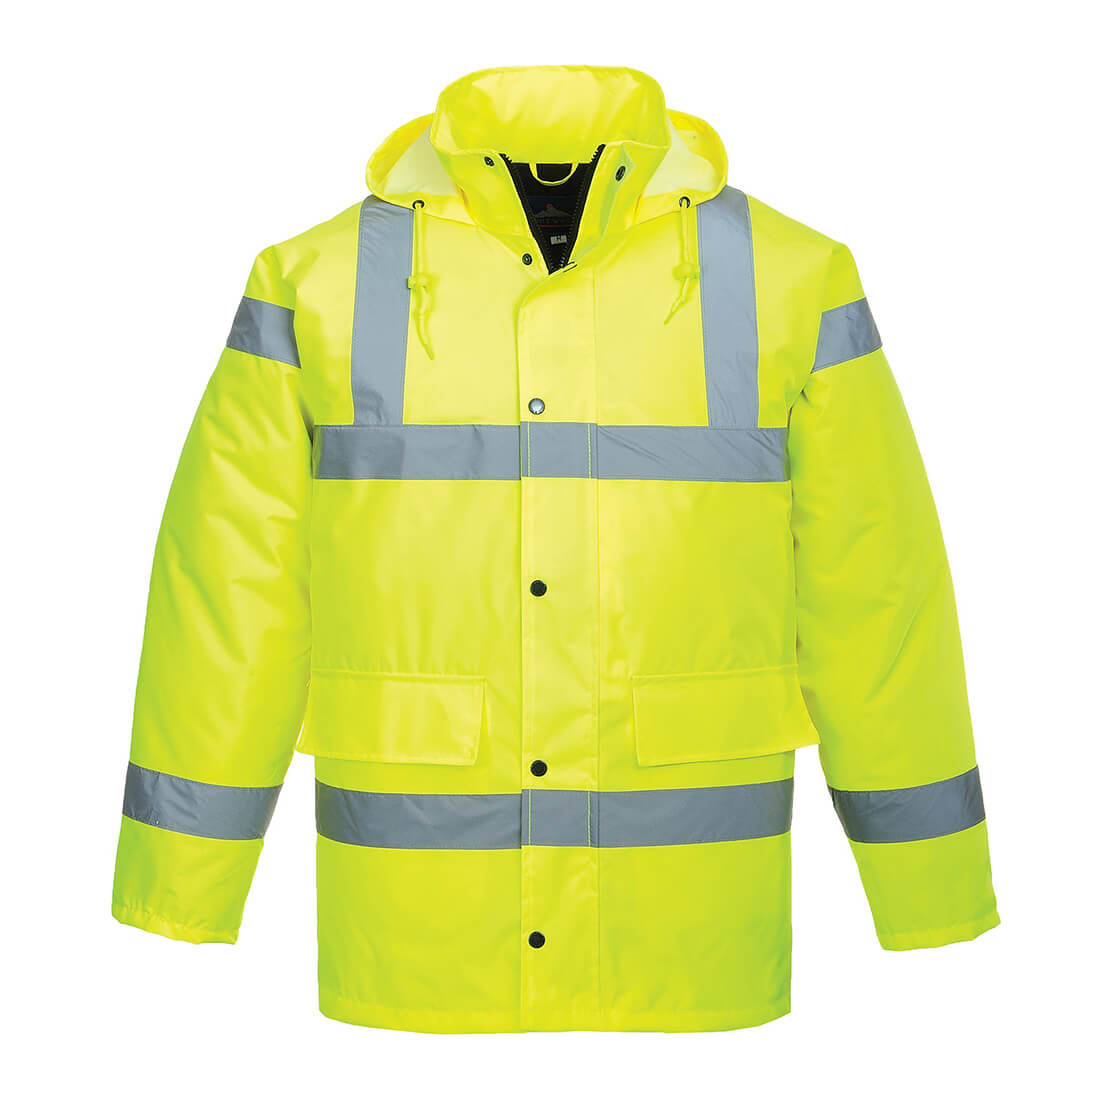 Image of Oxford Weave 300D Class 3 Hi Vis Traffic Jacket Yellow 4XL